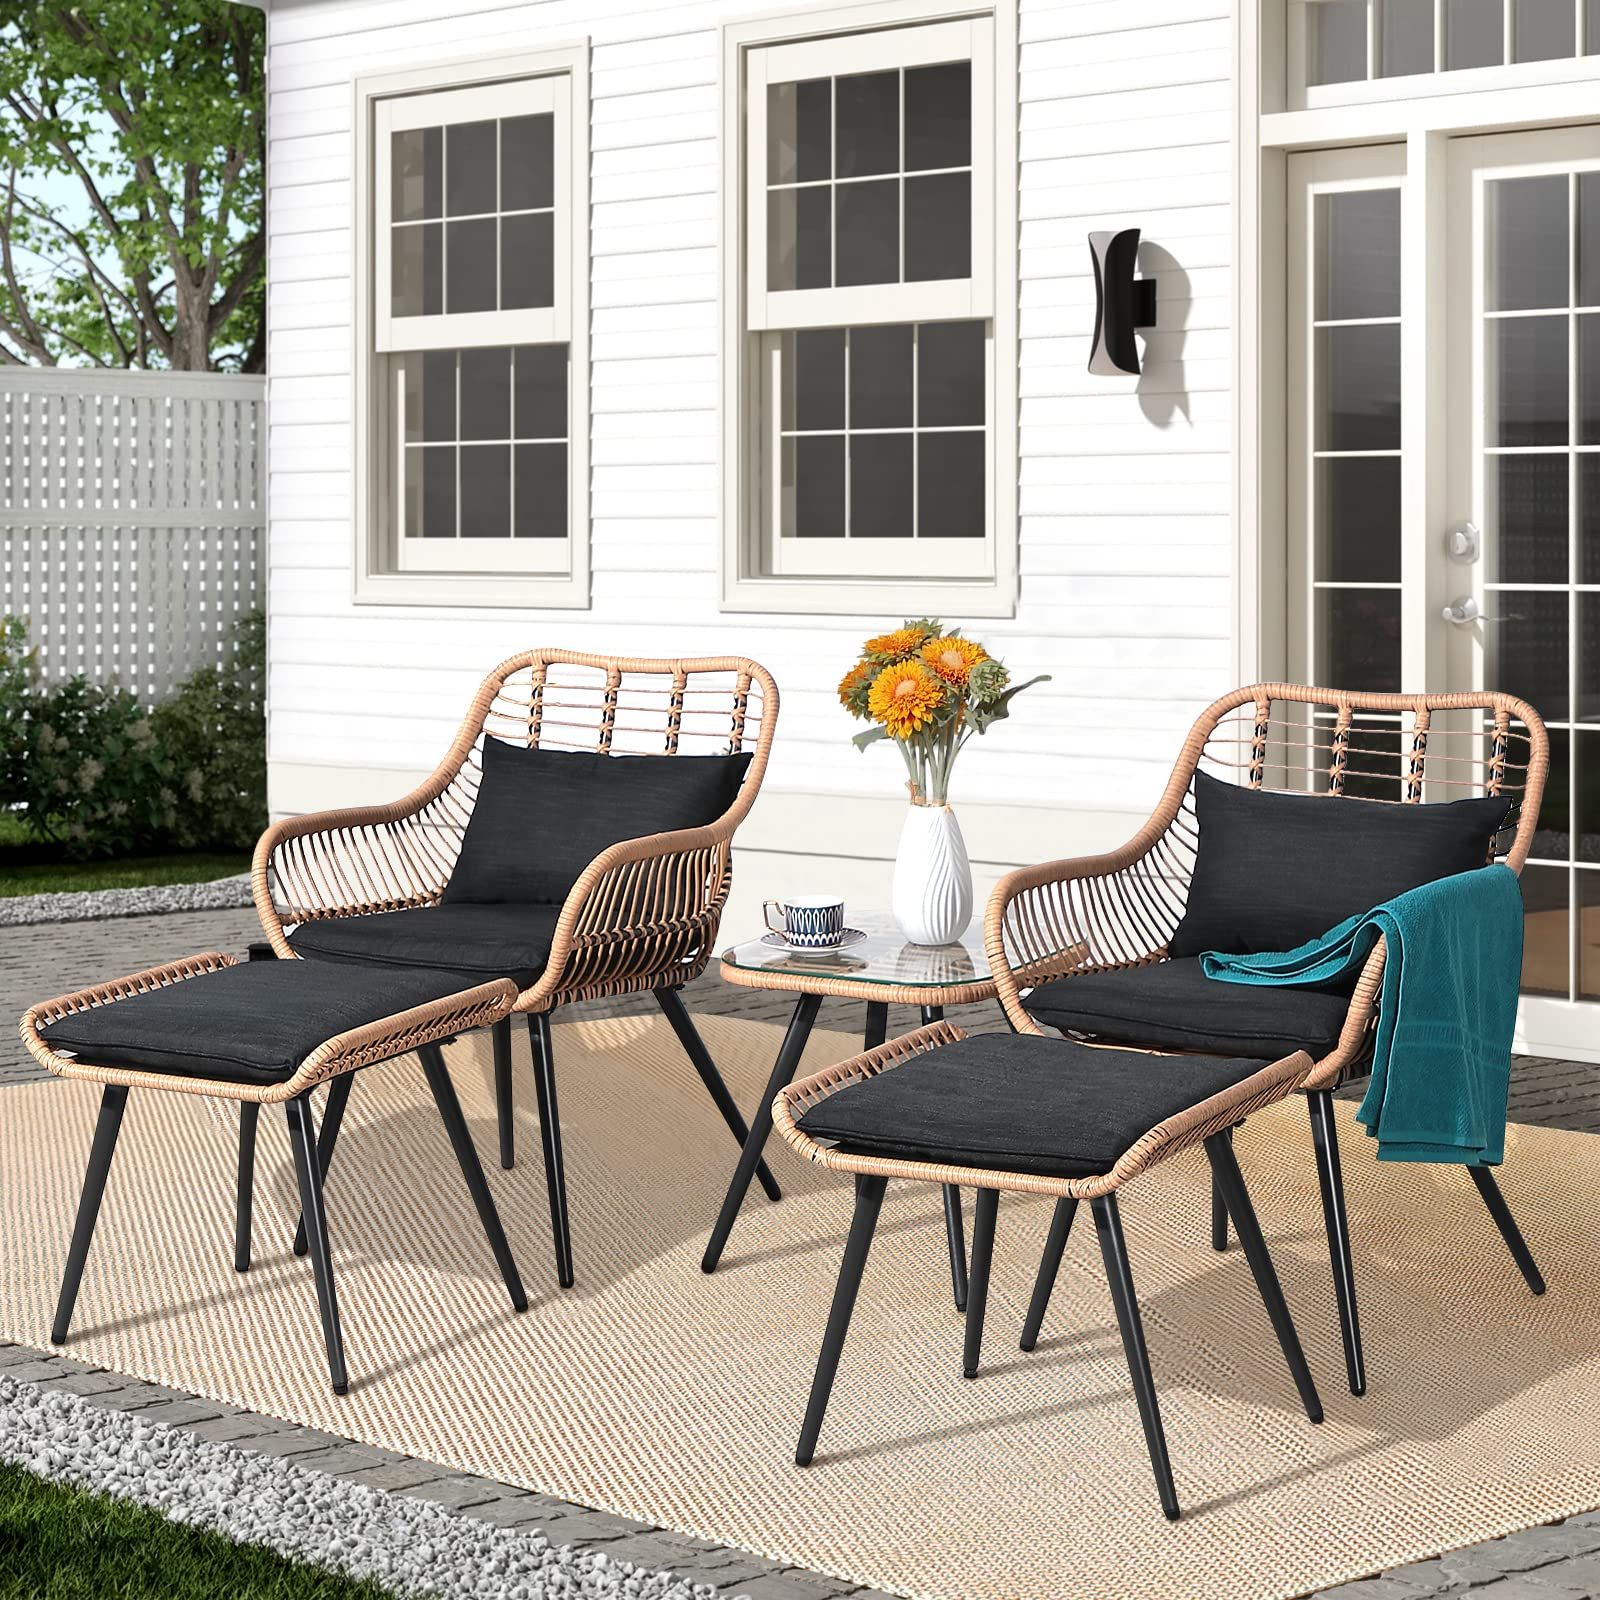 5 Piece Patio Furniture Set Intended For Fashionable Amazon: Joivi 5 Piece Outdoor Patio Furniture Set, Pe Rattan Wicker  Small Patio Conversation Set Porch Furniture, Cushioned Patio Chairs With  Ottomans And Side Table : Patio, Lawn & Garden (Photo 8 of 15)